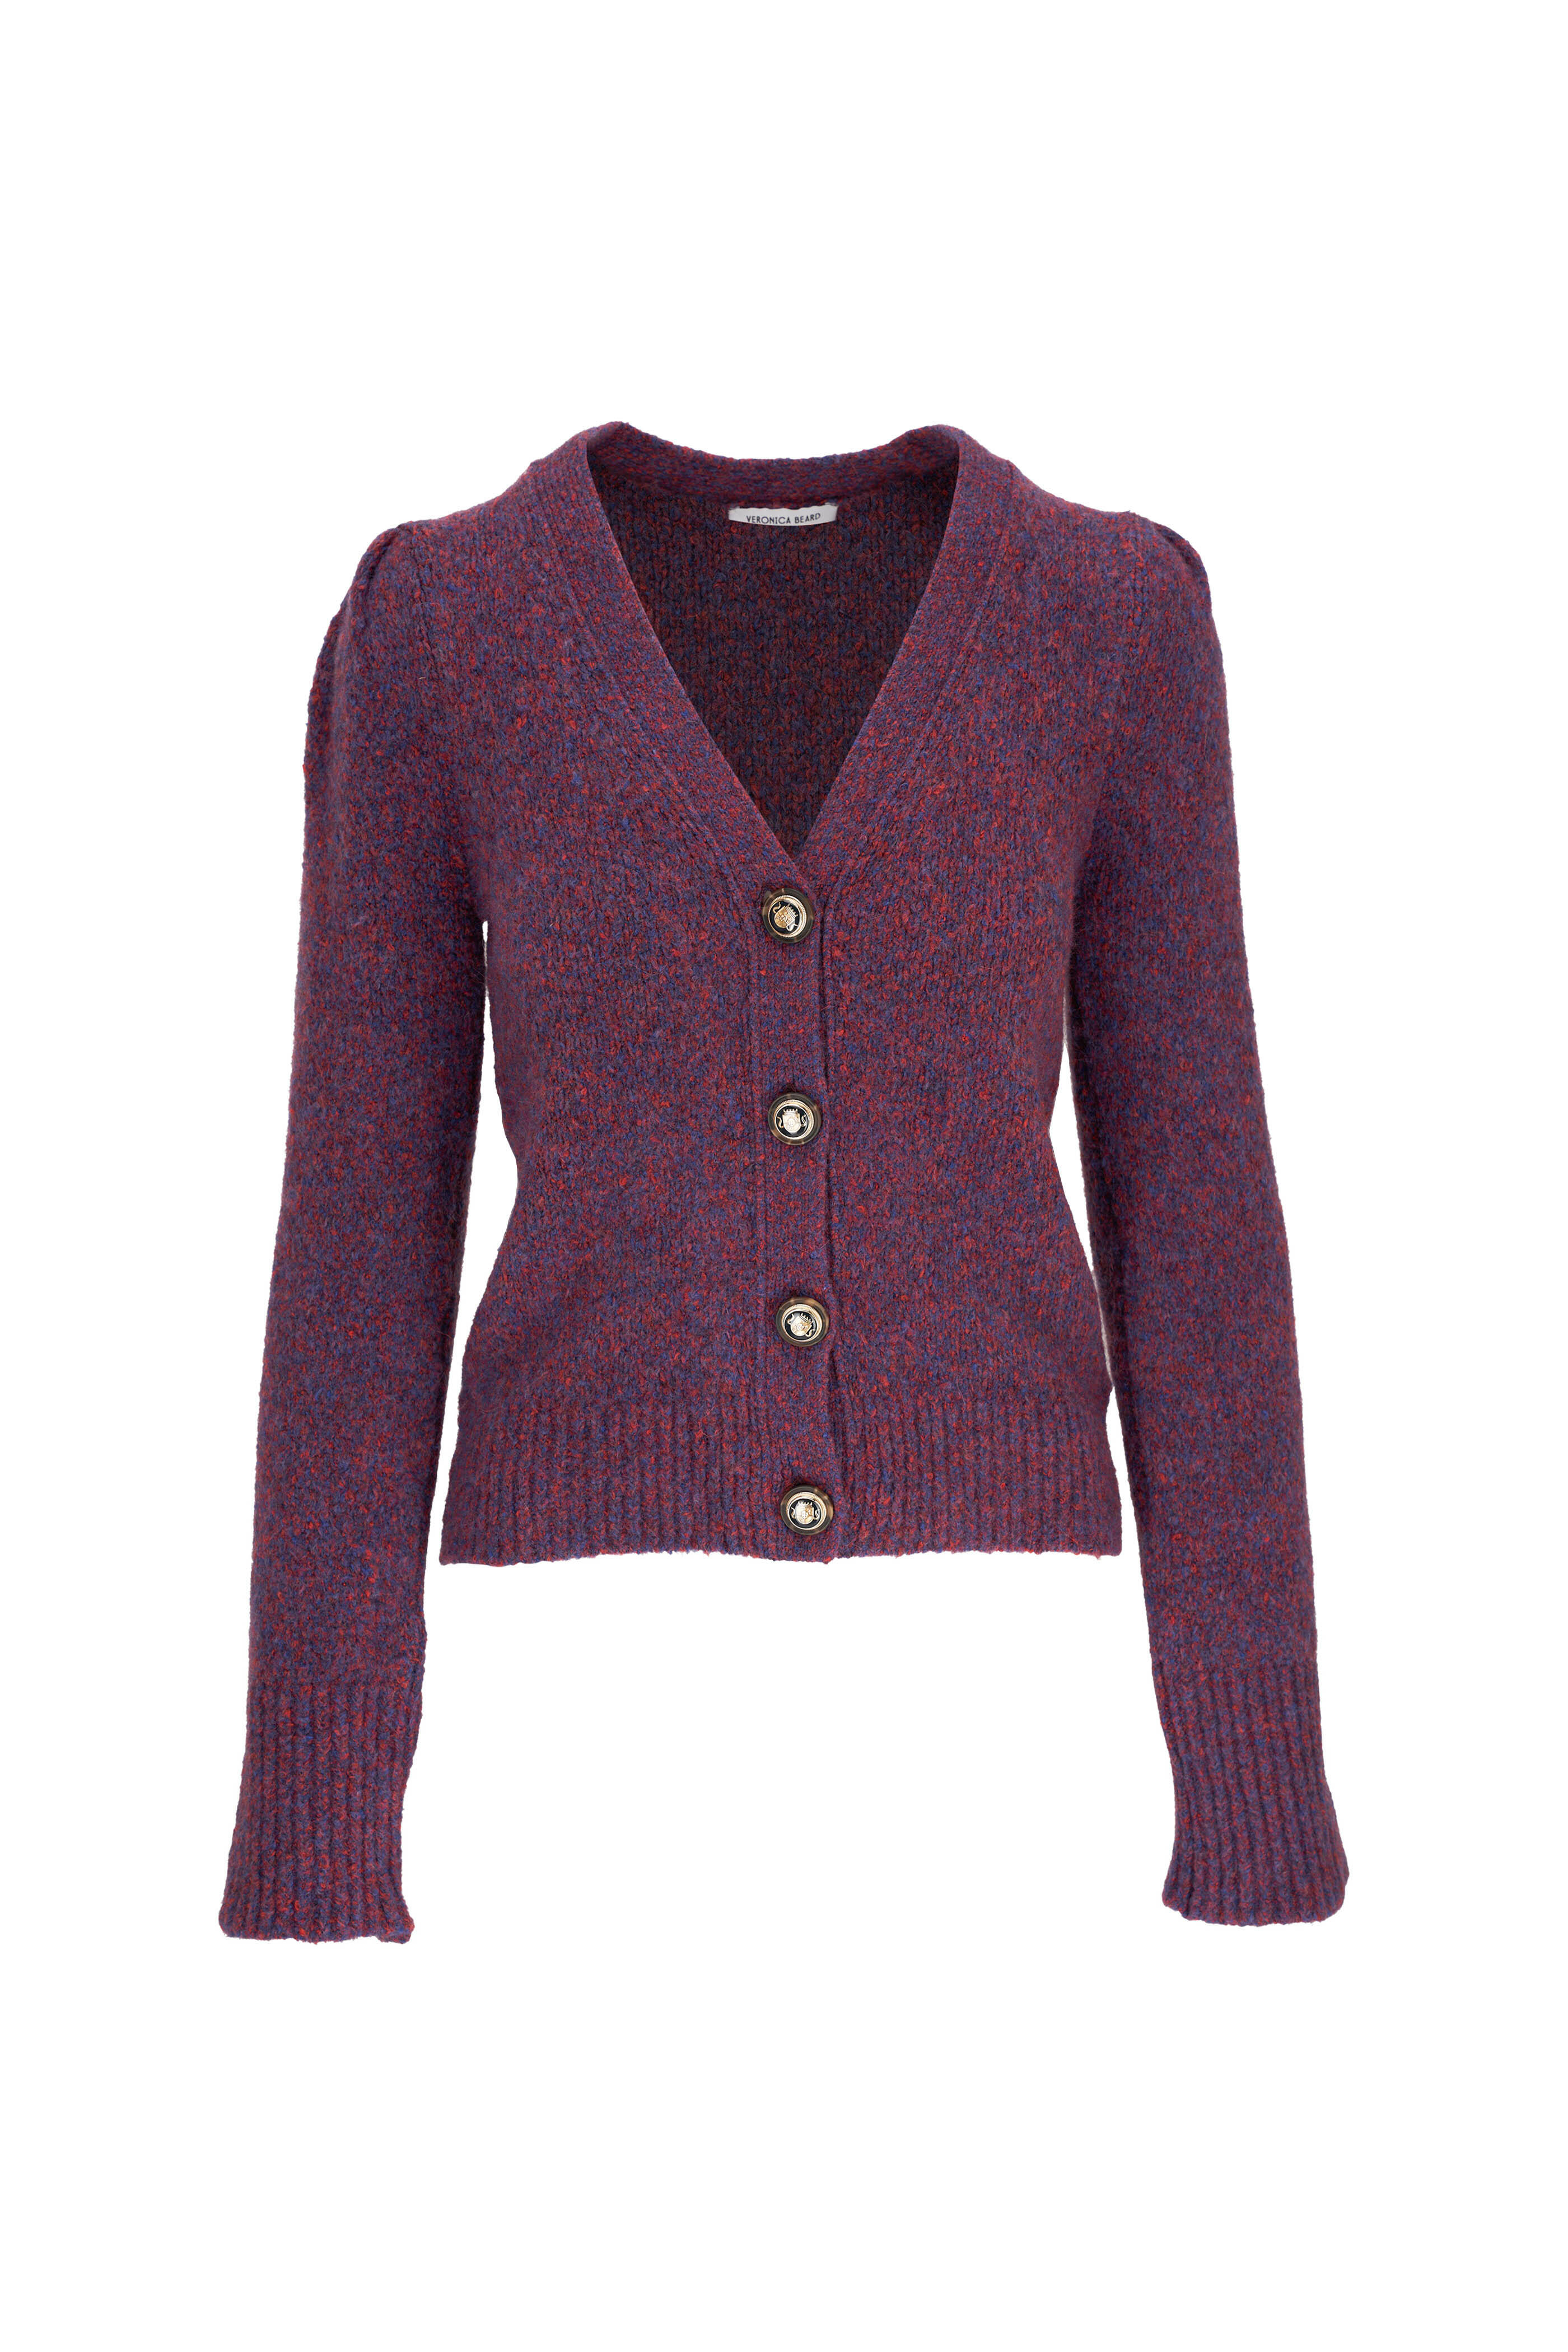 Veronica Beard - Ubah Red Multi Knit Cardigan | Mitchell Stores